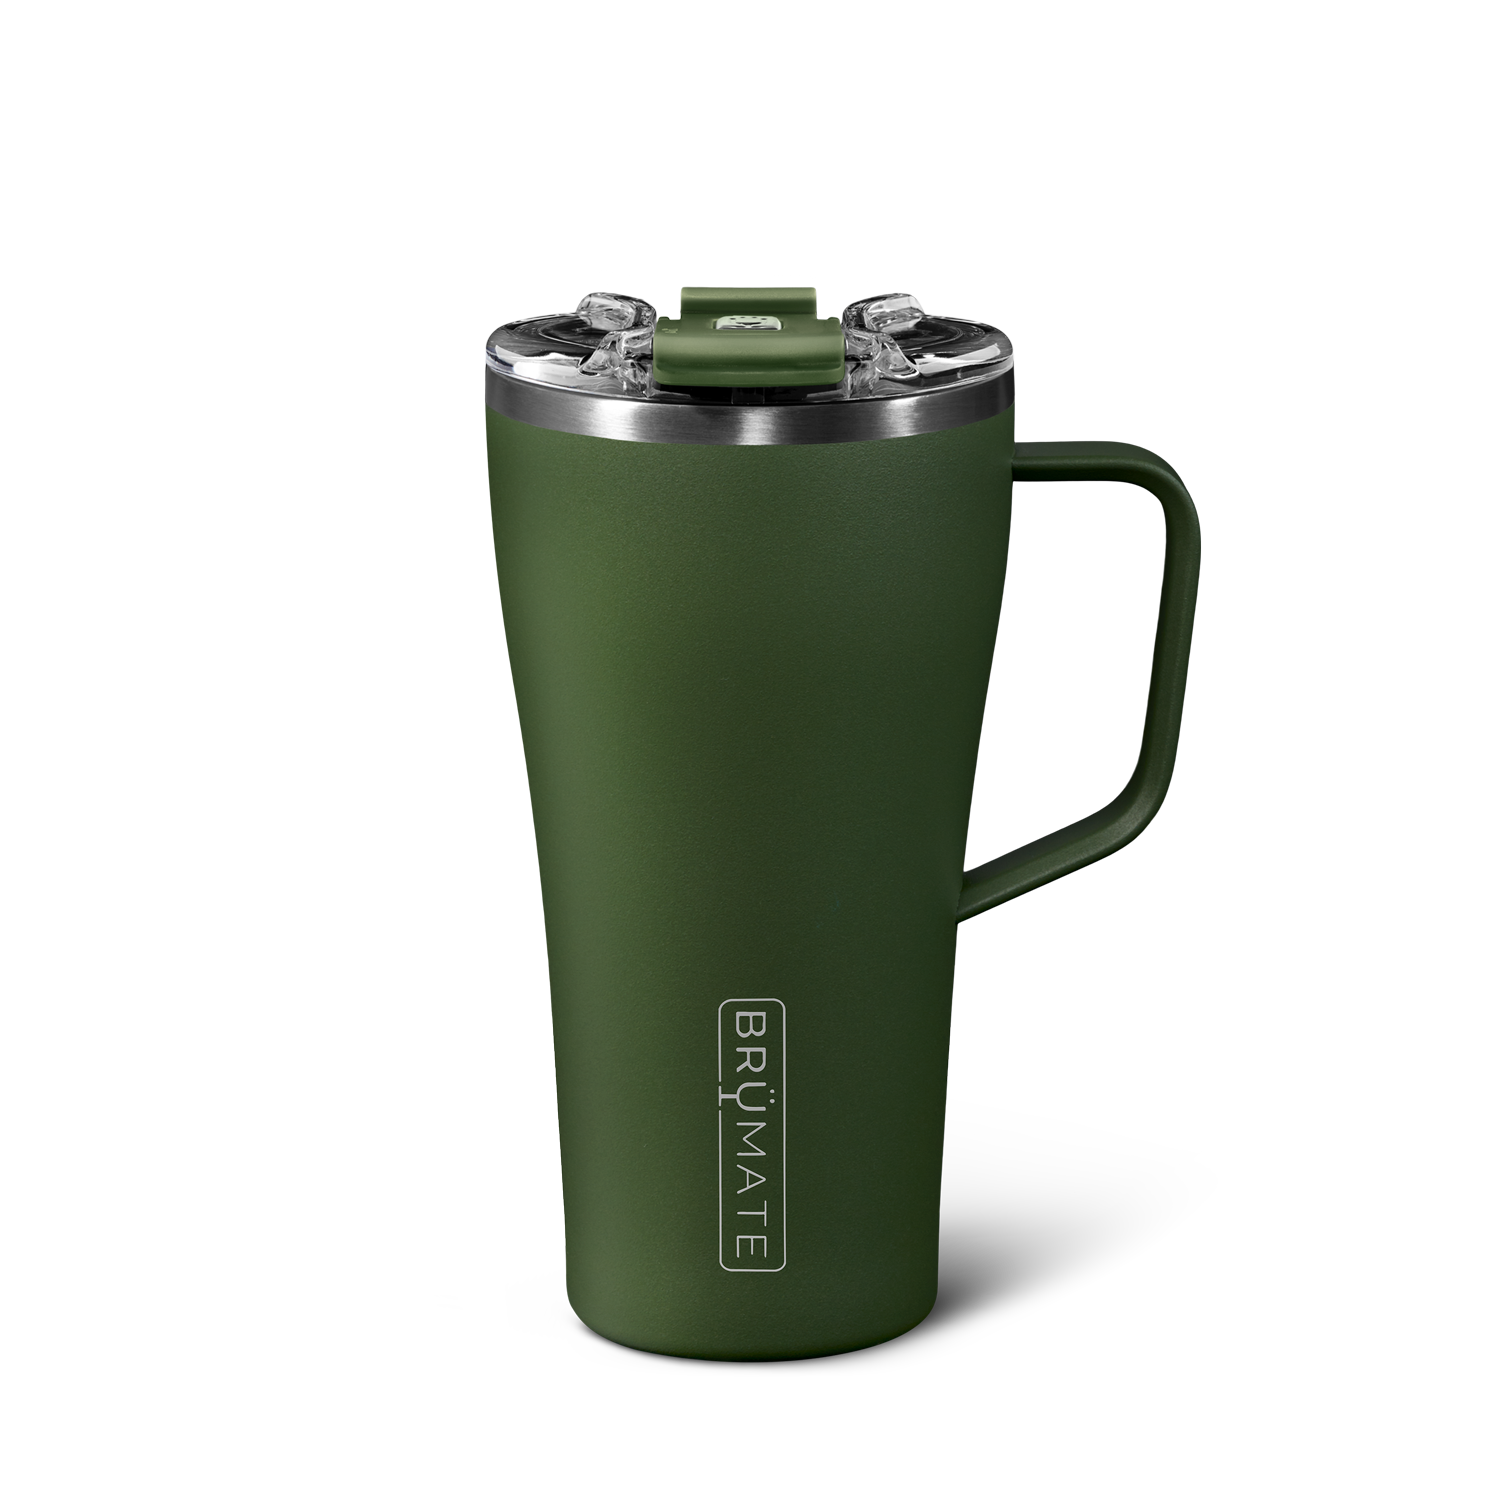 https://cdn.shopify.com/s/files/1/1114/2308/products/toddy-22-od-green.png?v=1660190642